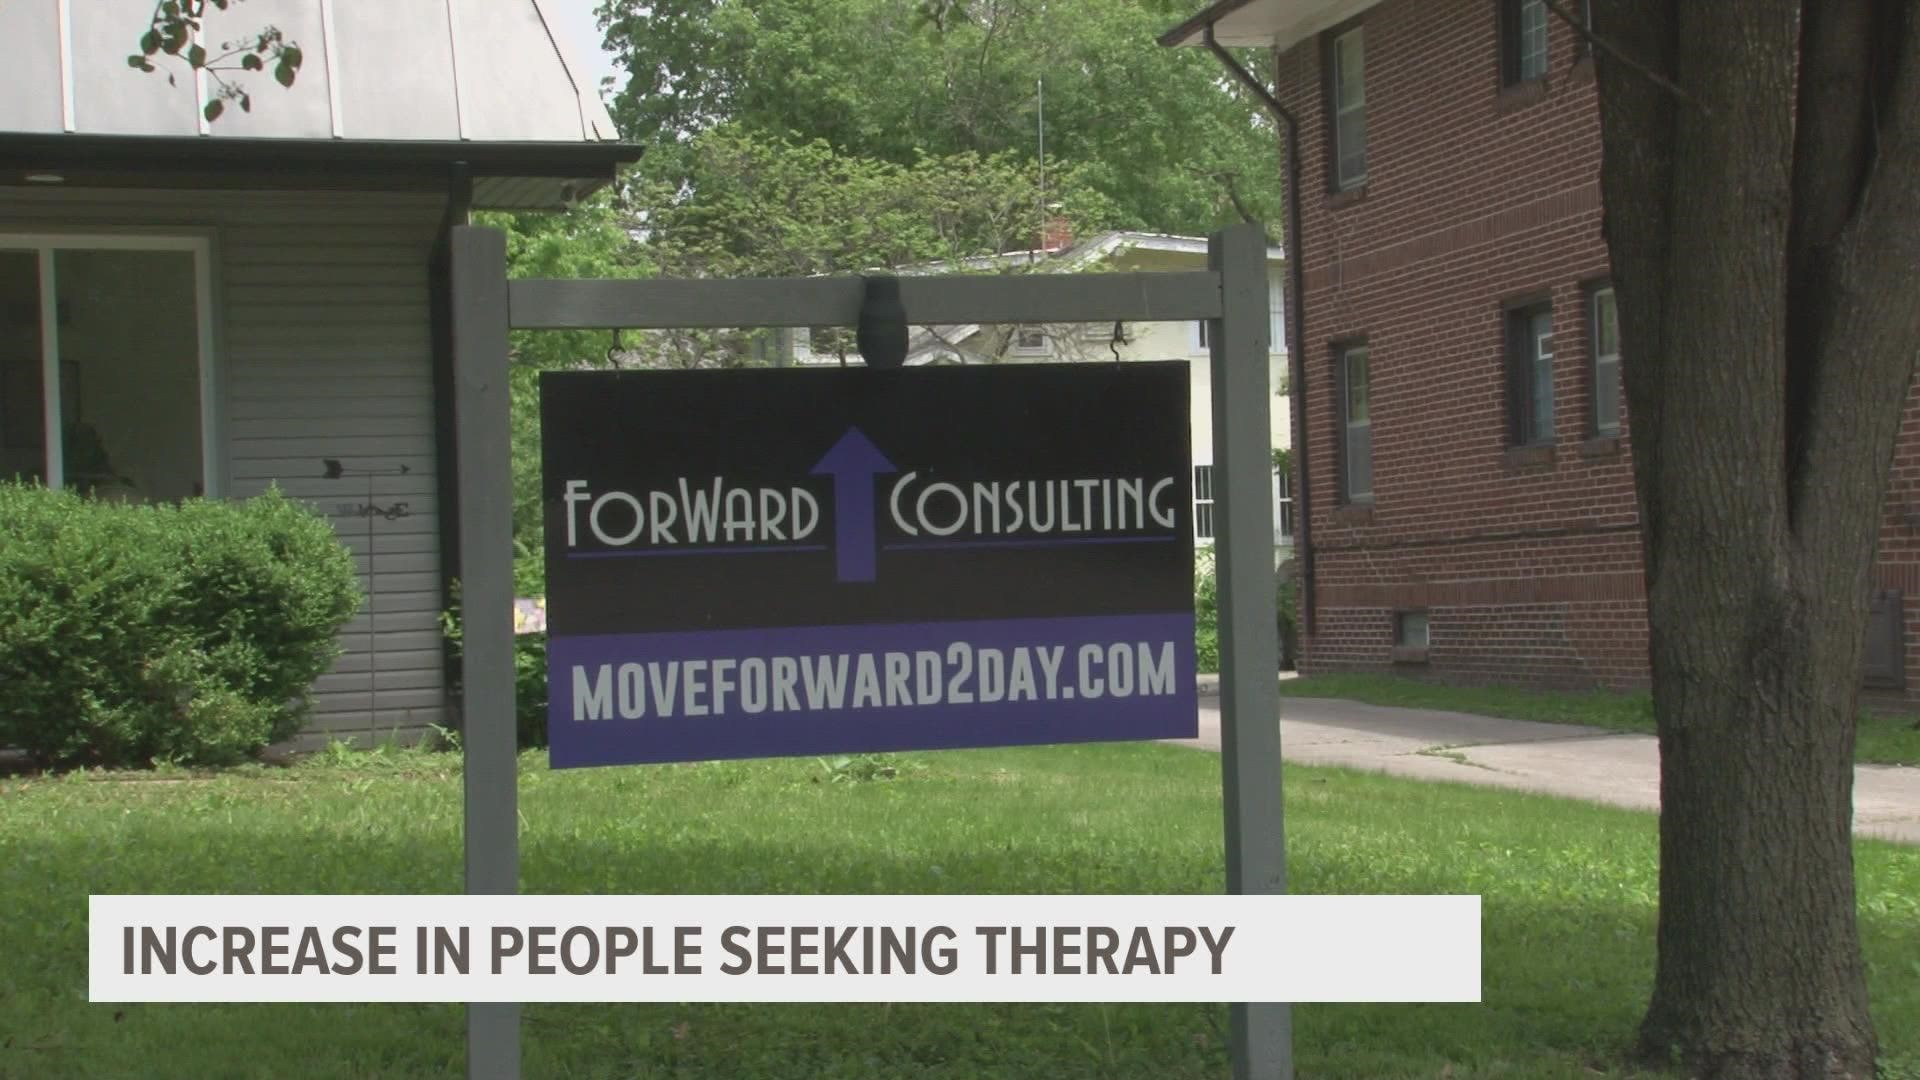 Forward Consulting saw an increase in clients coming in to get counseling over the course of the pandemic. So much so, they've stopped accepting new clients.